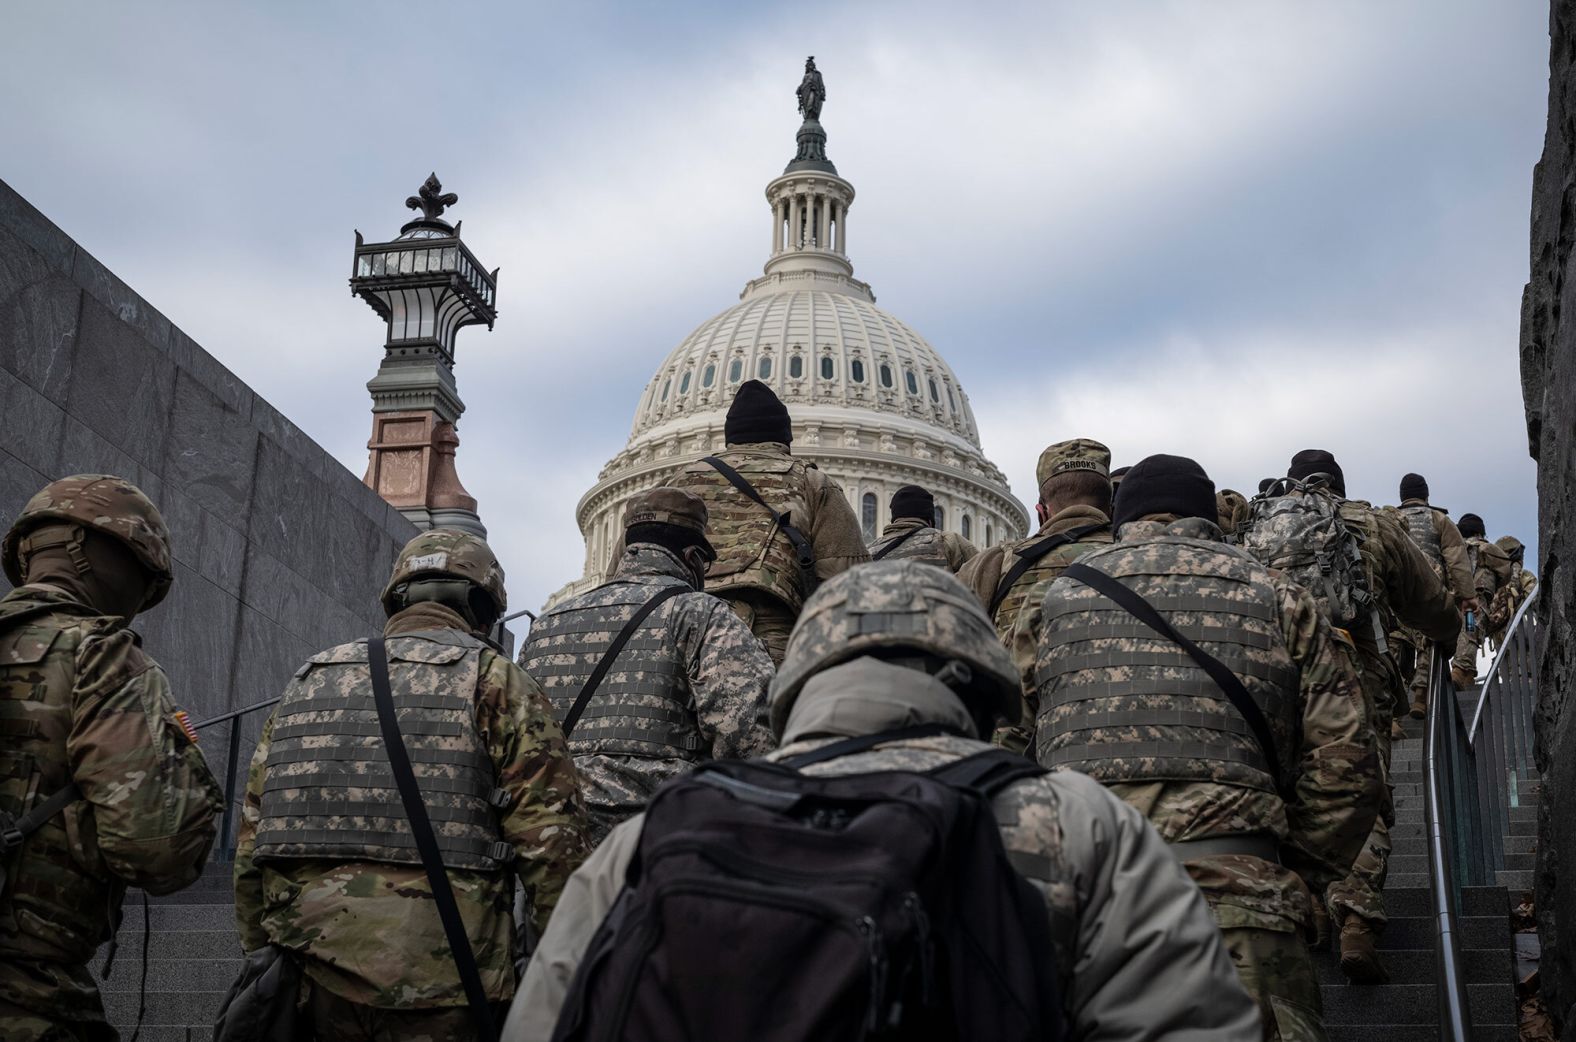 National Guard members walk on the US Capitol grounds on the day before the inauguration. The Pentagon <a href="index.php?page=&url=https%3A%2F%2Fwww.cnn.com%2F2021%2F01%2F15%2Fpolitics%2Fpentagon-national-guard-inauguration%2Findex.html" target="_blank">authorized up to 25,000 National Guard members</a> to help secure the event.